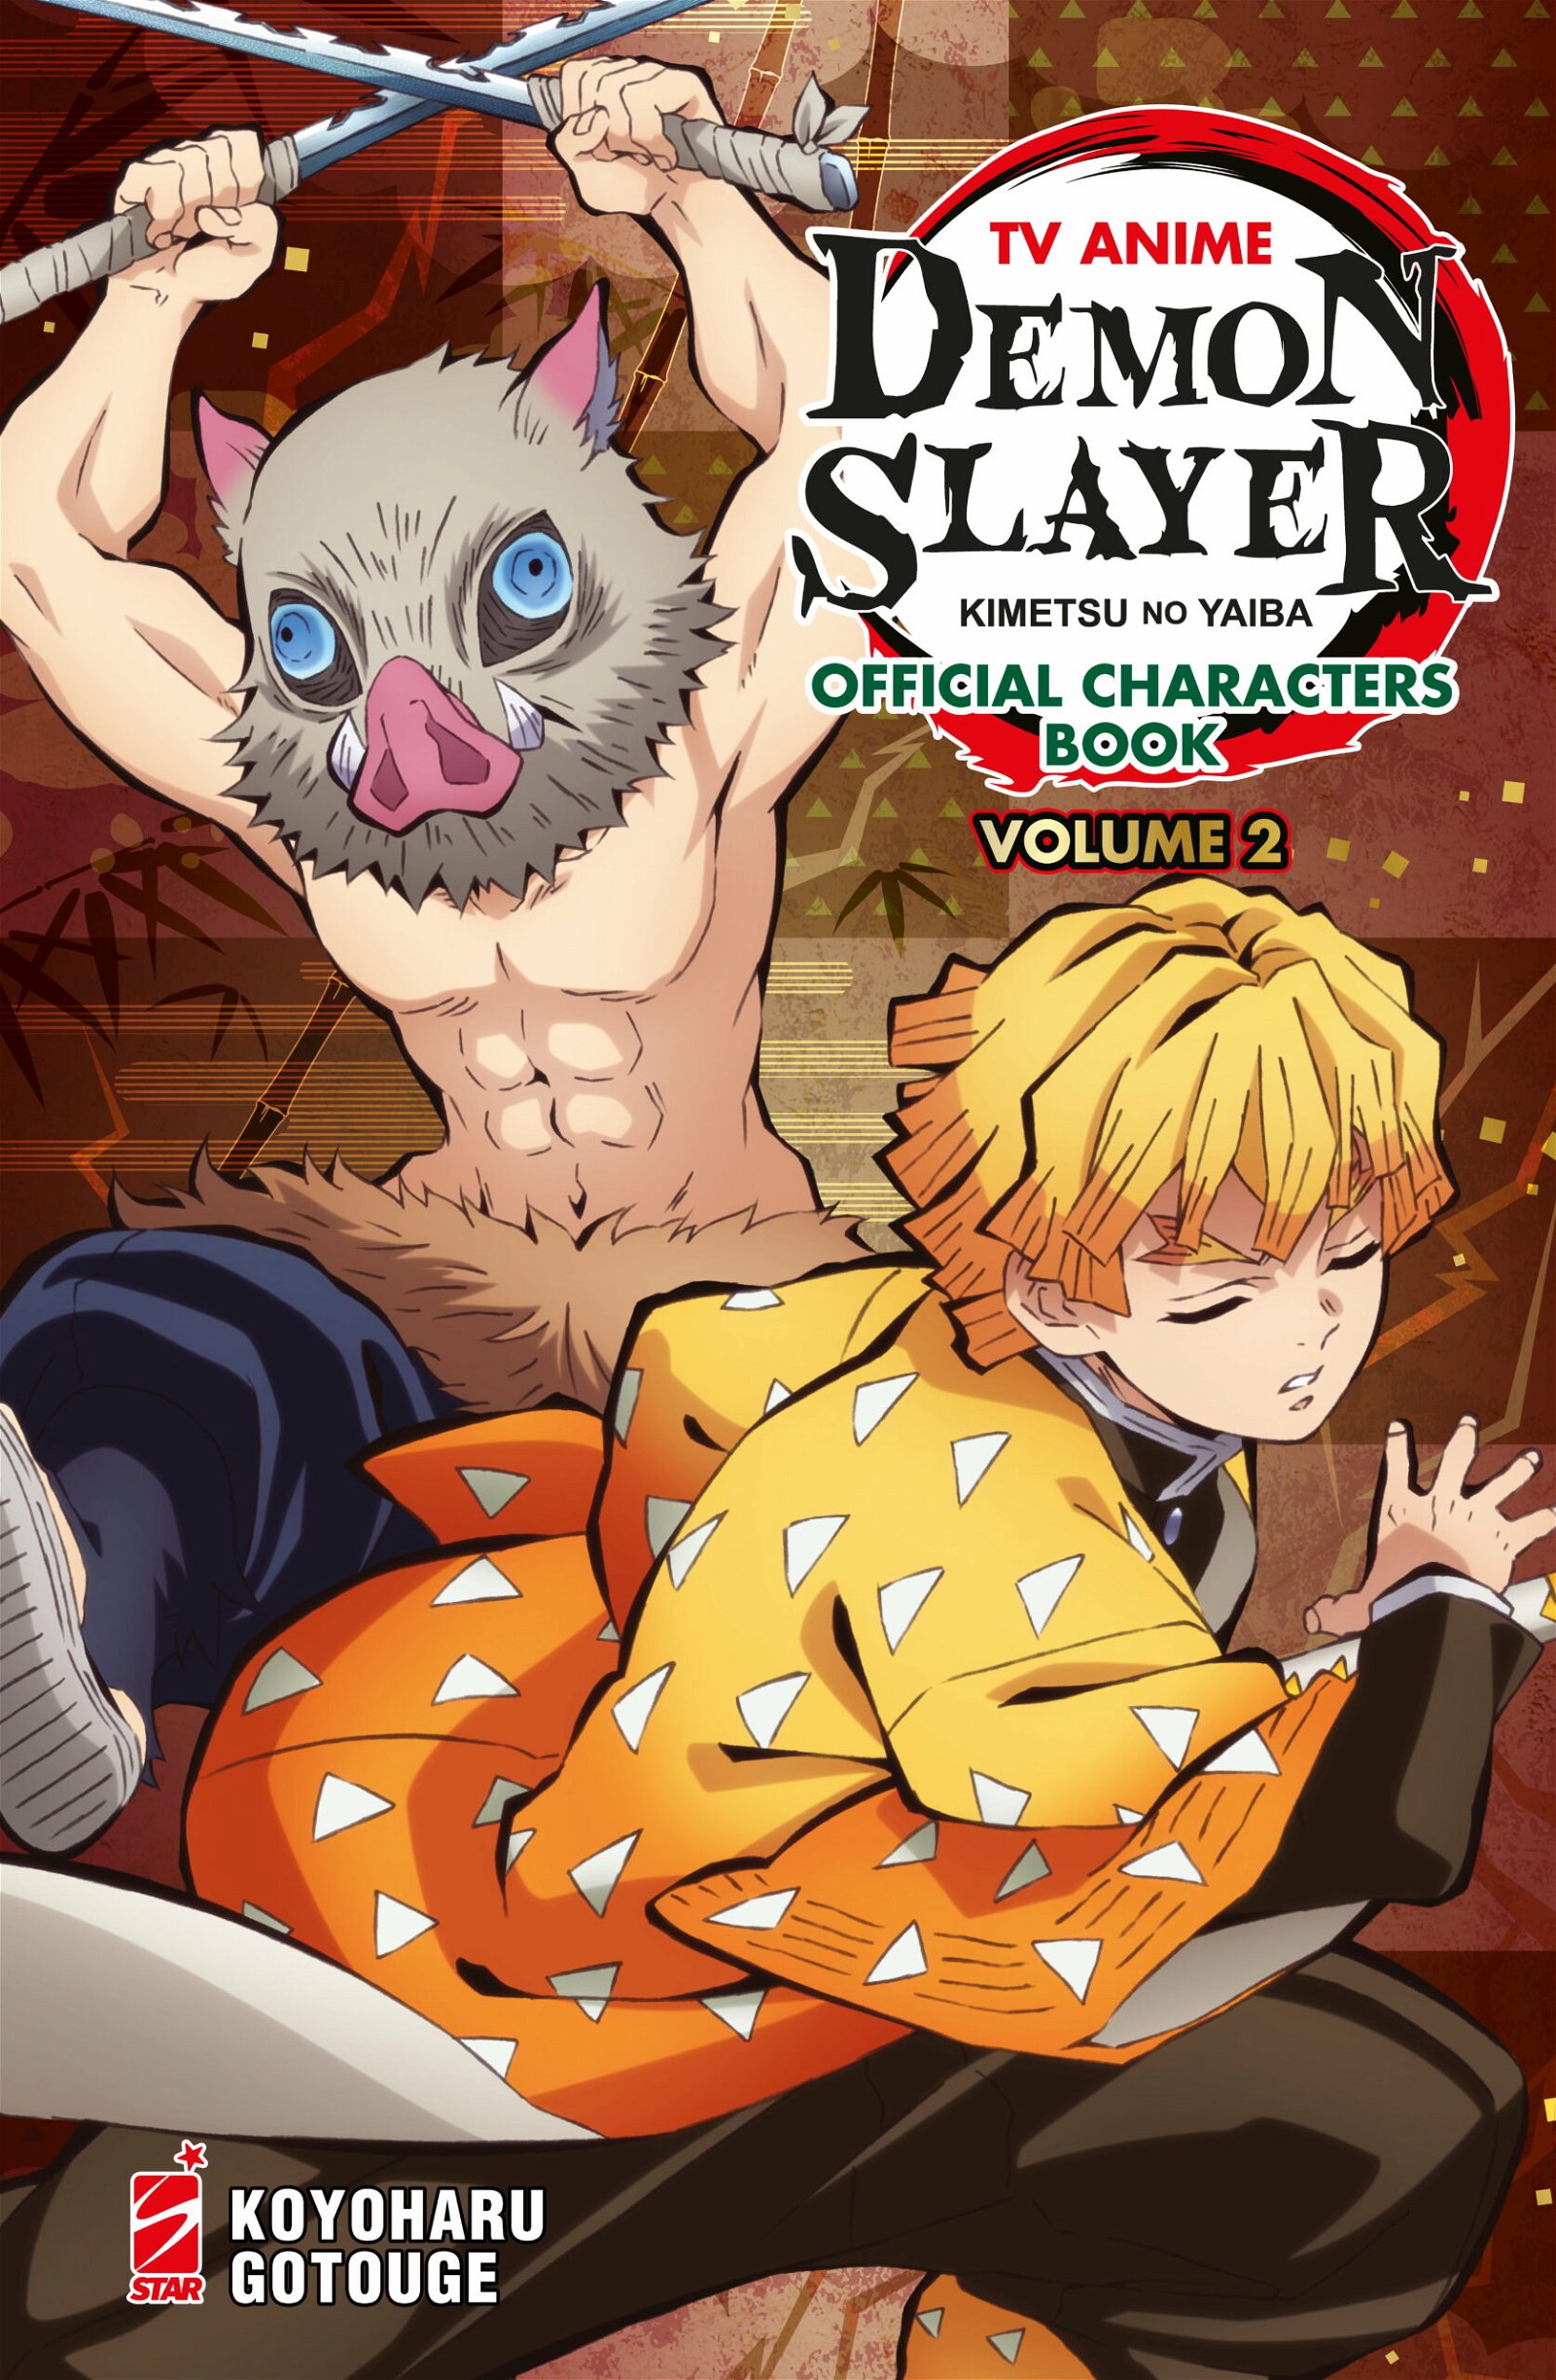 DEMON SLAYER TV ANIME OFFICIAL CHARACTERS BOOK 2 DI 3